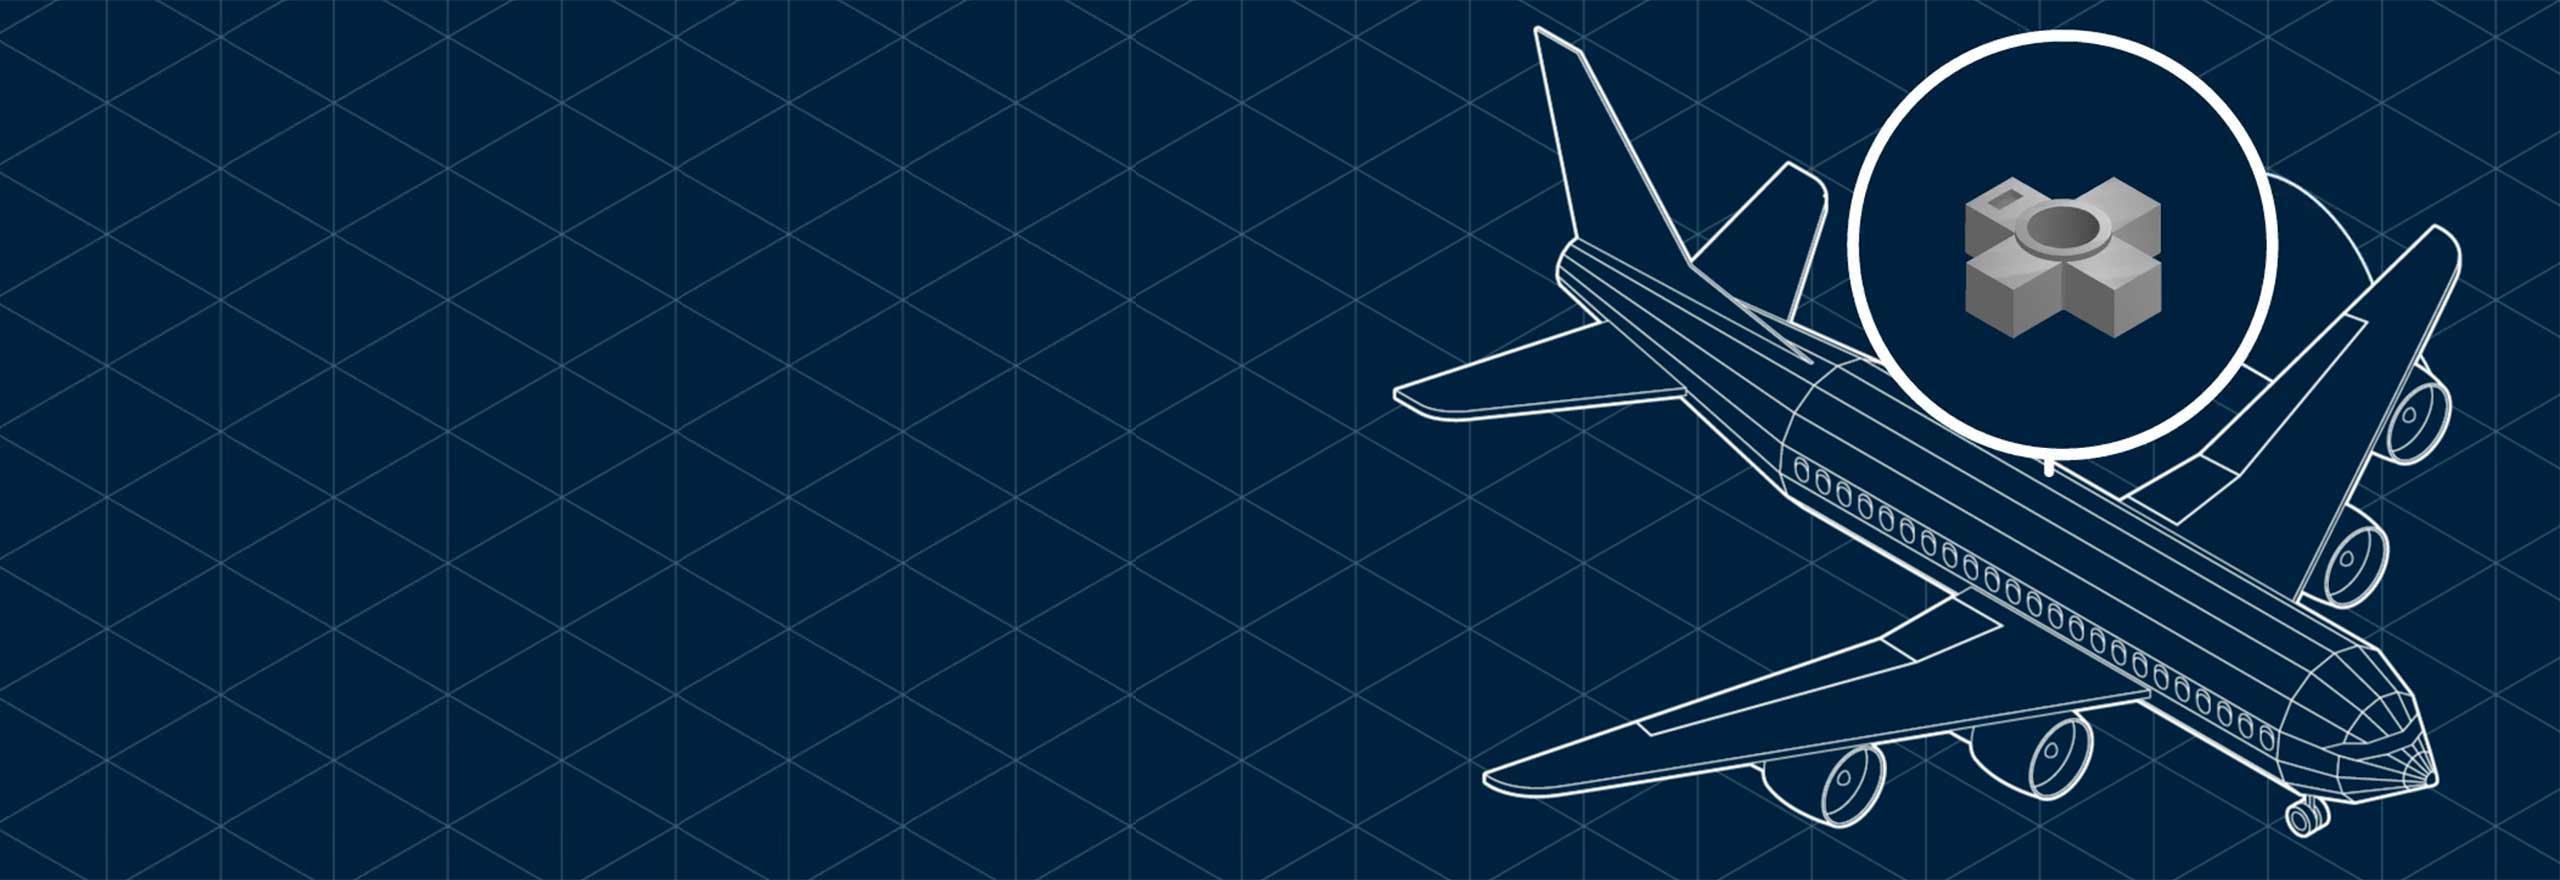 Airplane drawing on blue background of triangles, illustrating reverse engineering of a part in additive manufacturing process